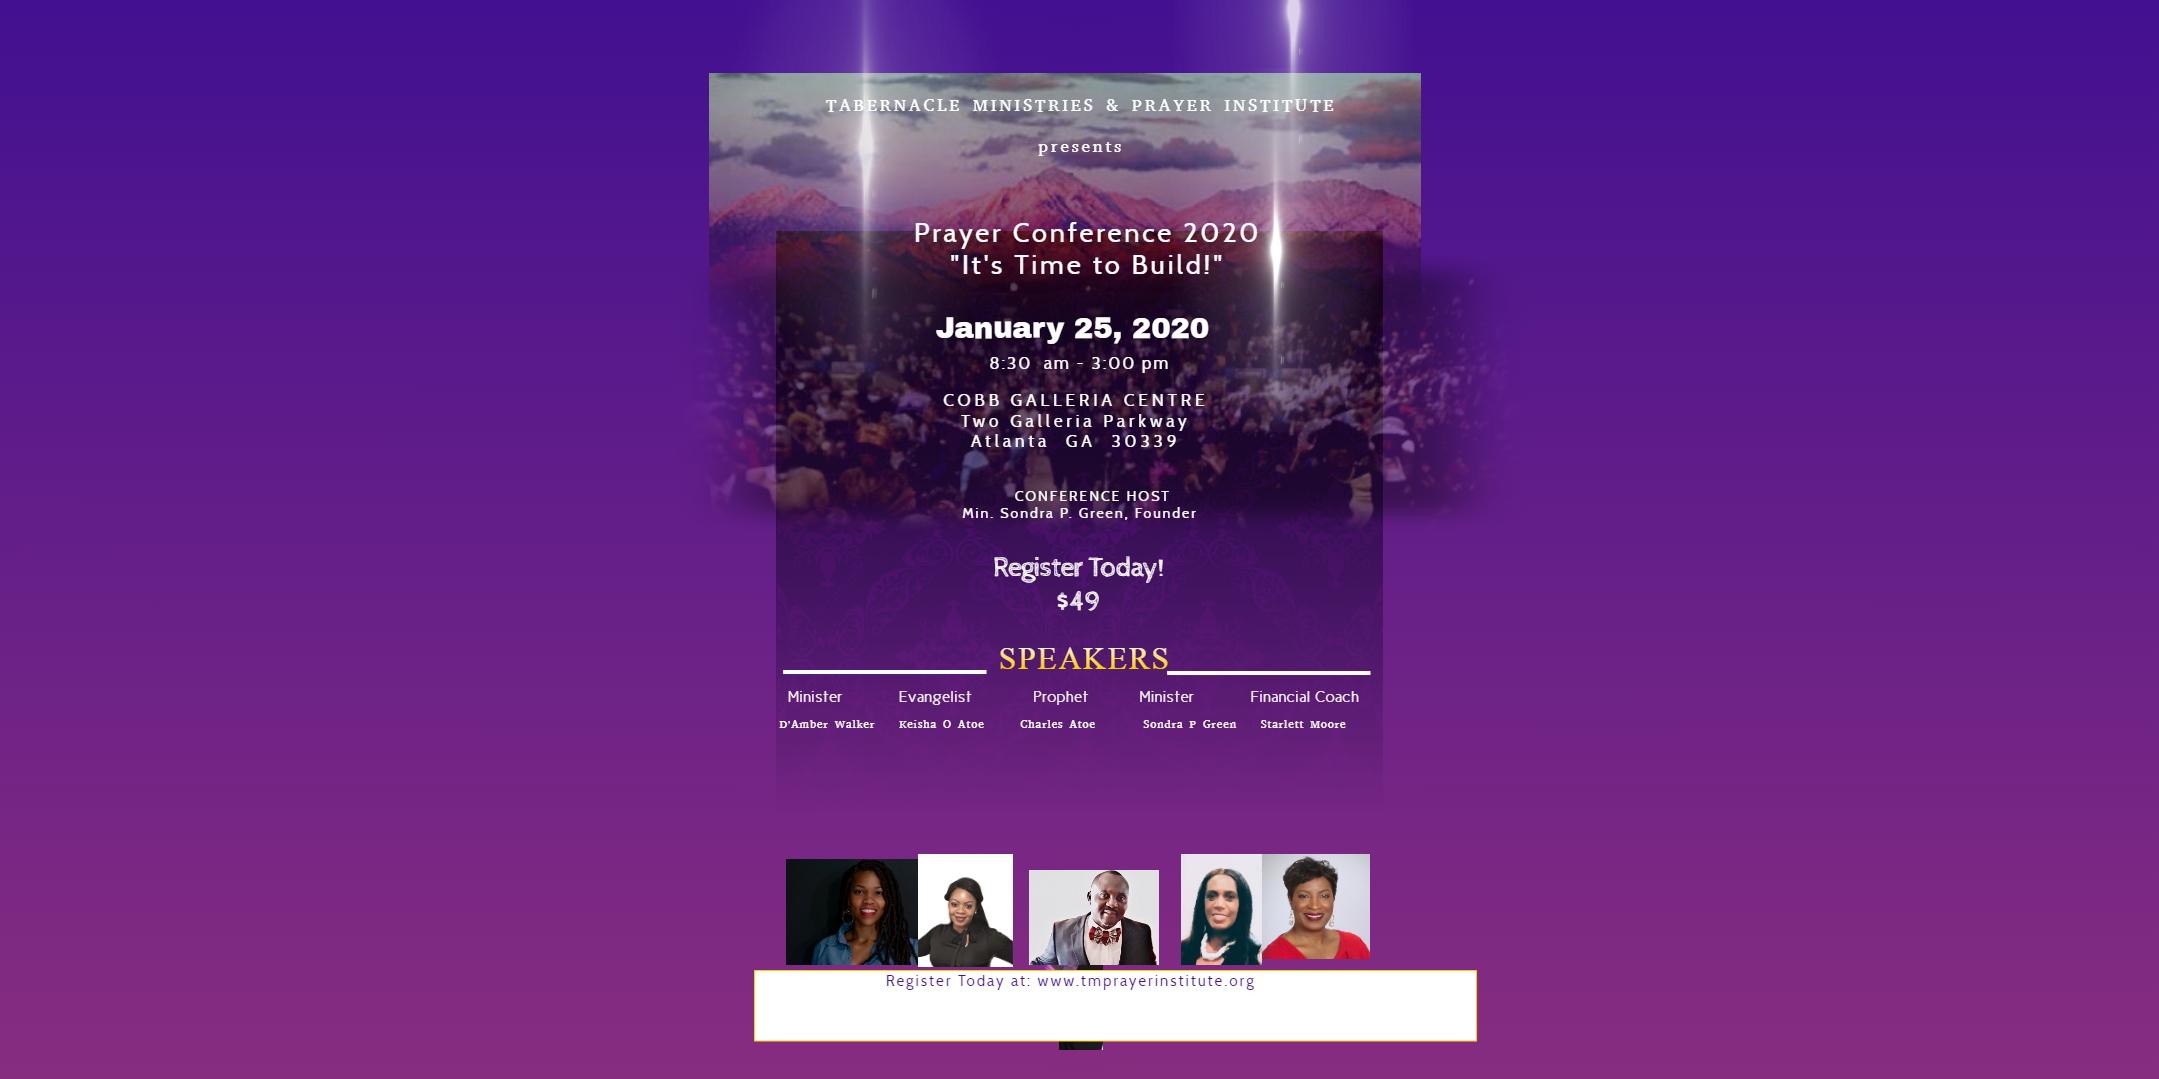 Tabernacle Ministries & Prayer Institute 2020 Prayer Conference It's Time to Build!